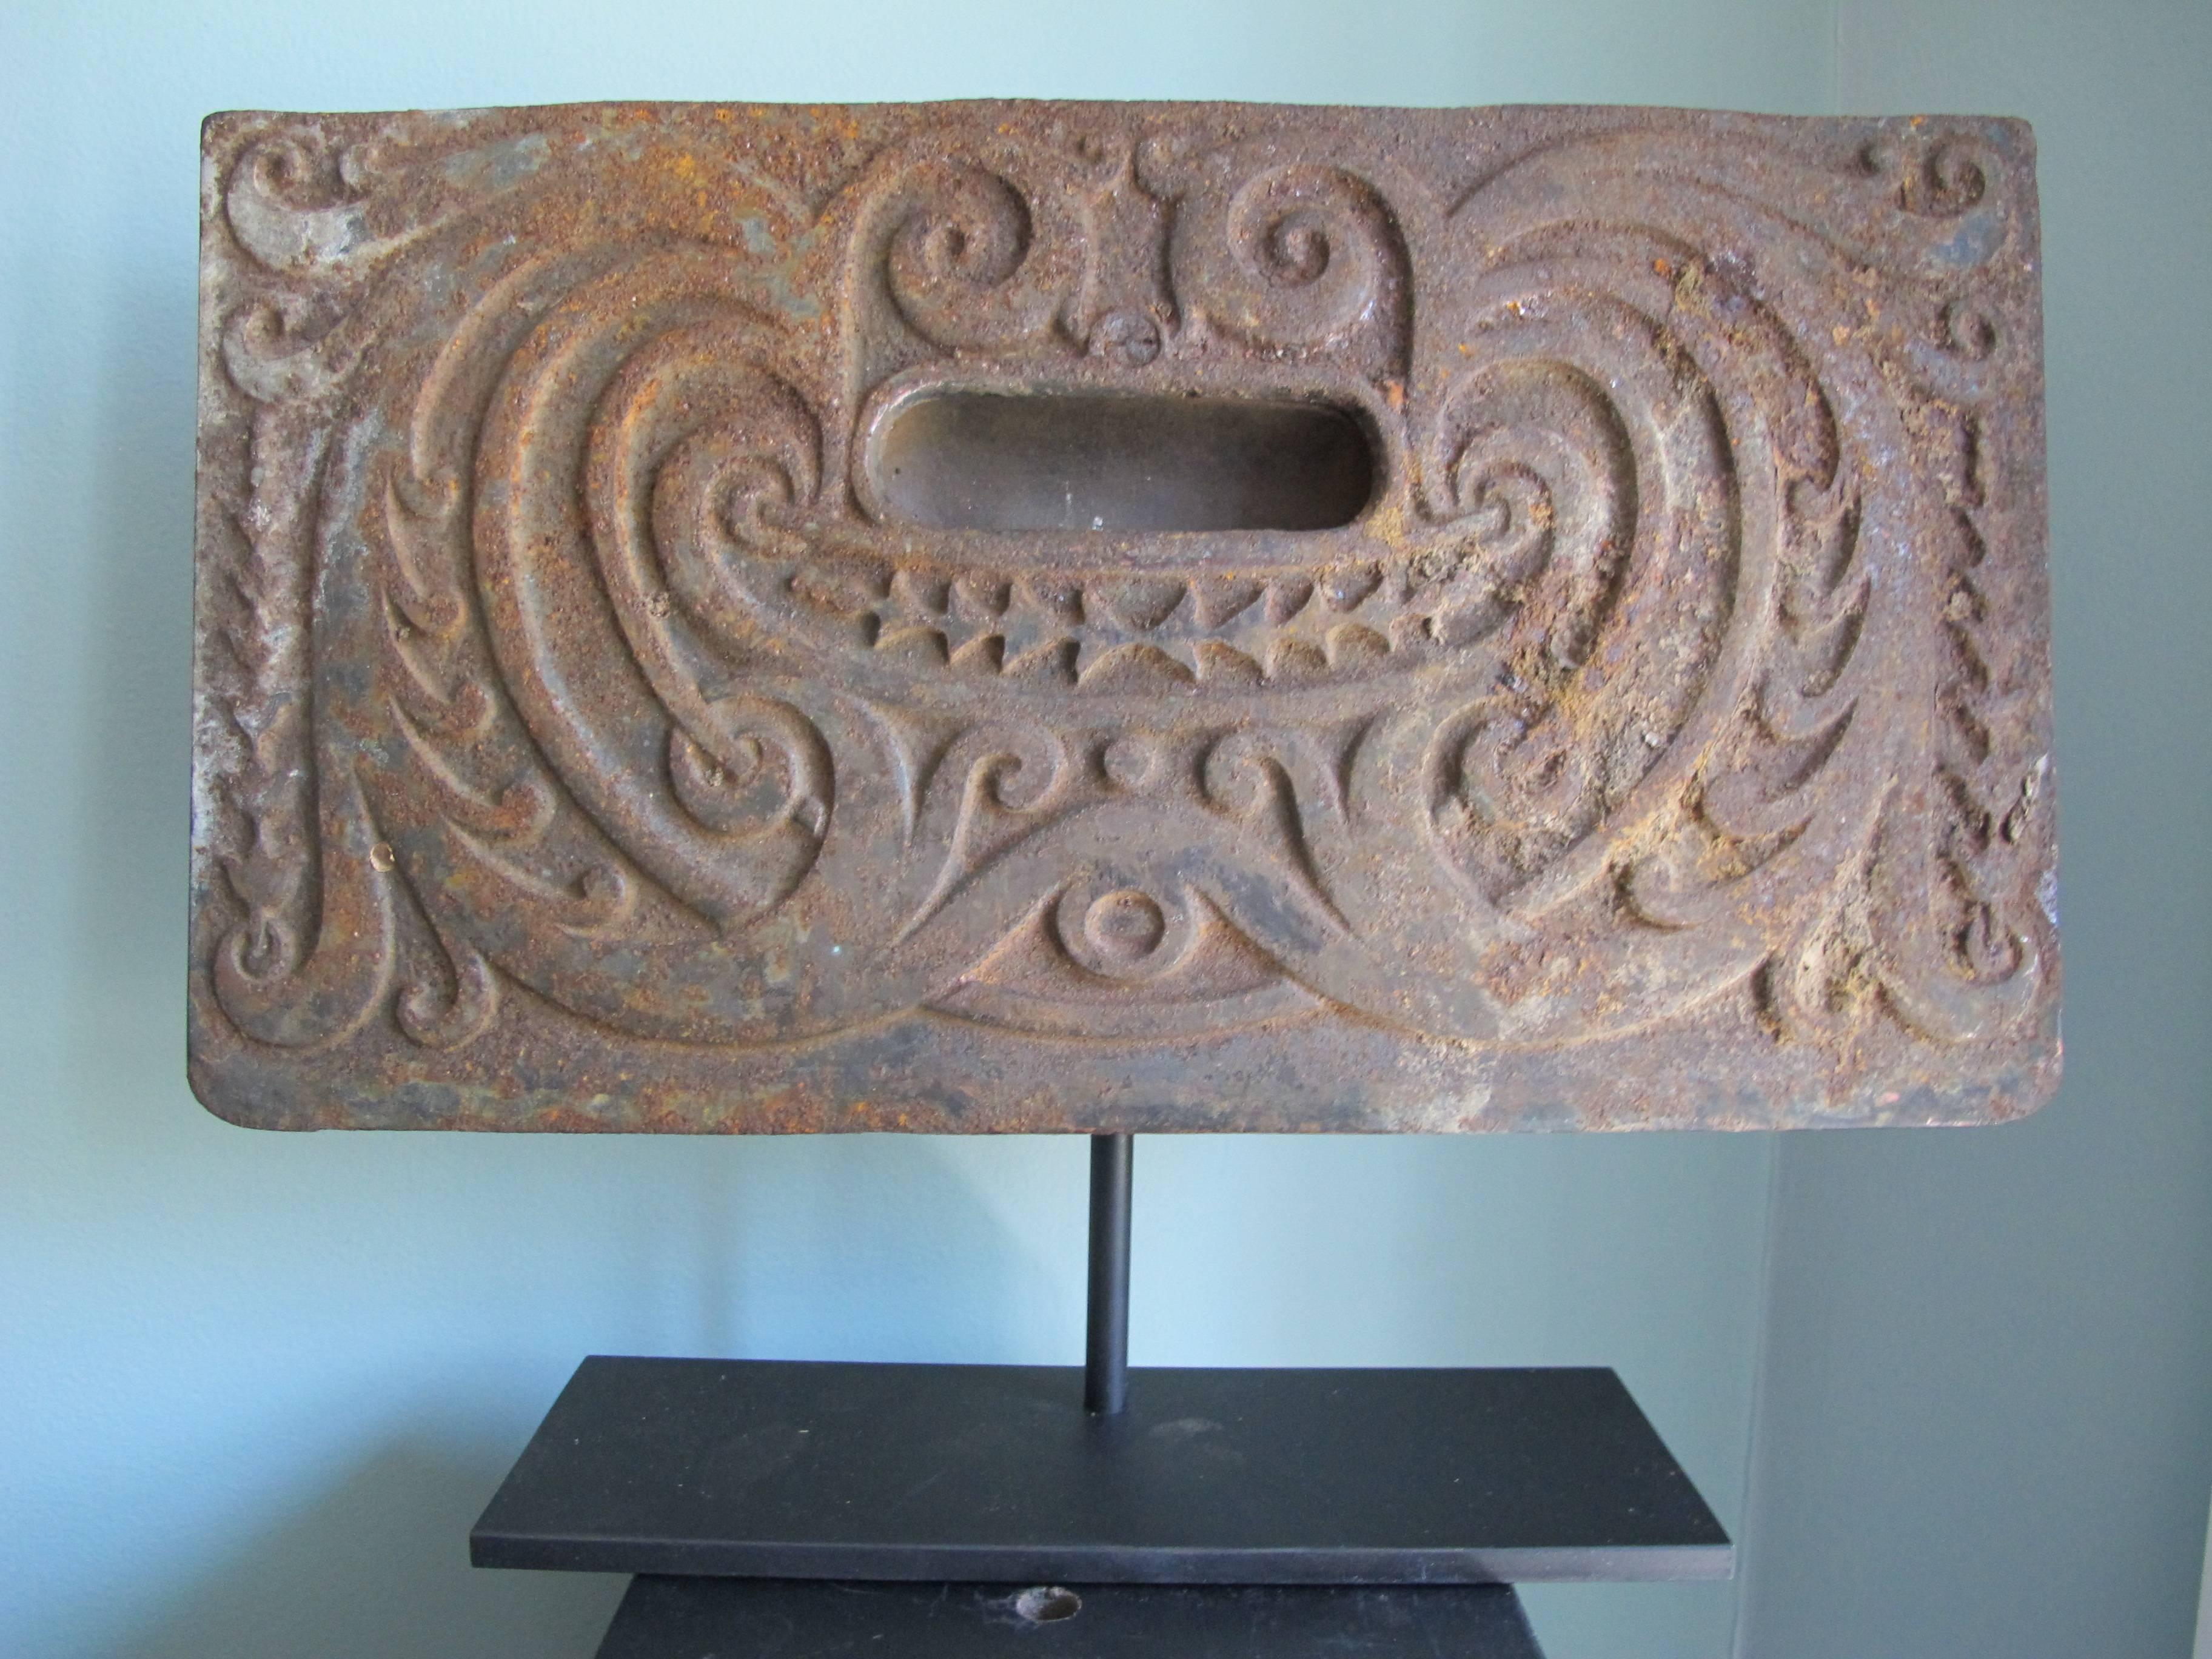 Graphic stove vent door with elaborate scroll work designs in relief. Making a face. Mounted over metal base.